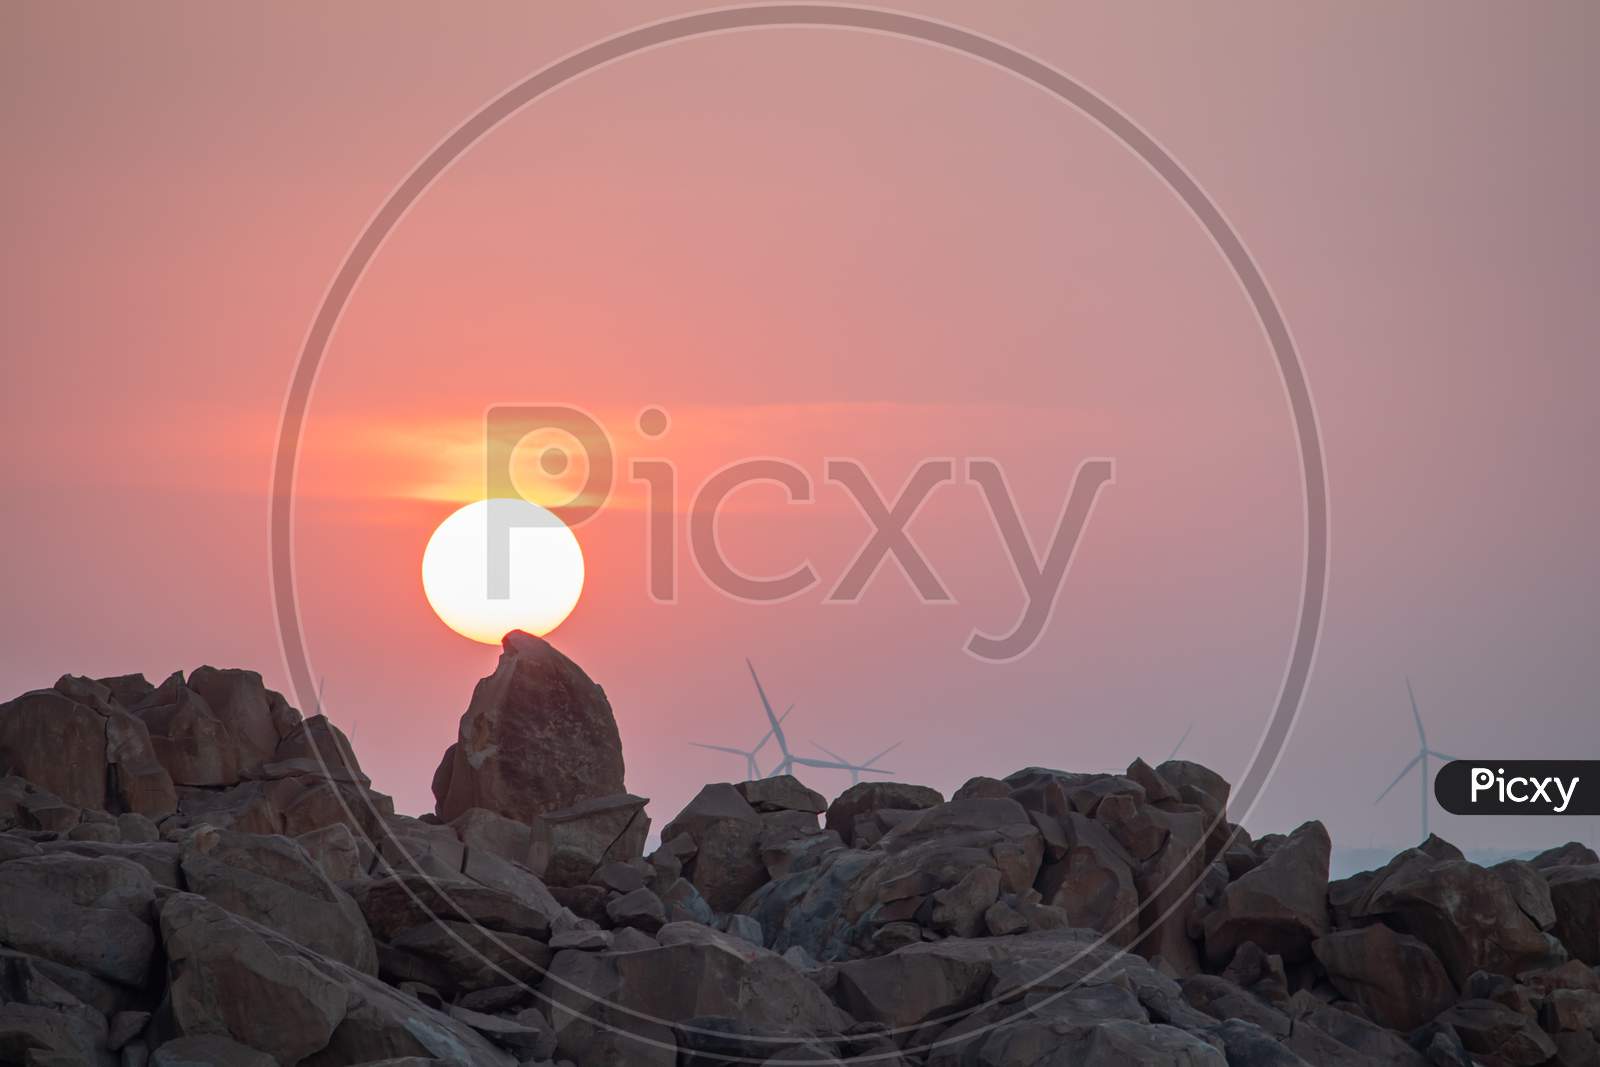 Huge Sun during Sunset with Rocks in the Foreground